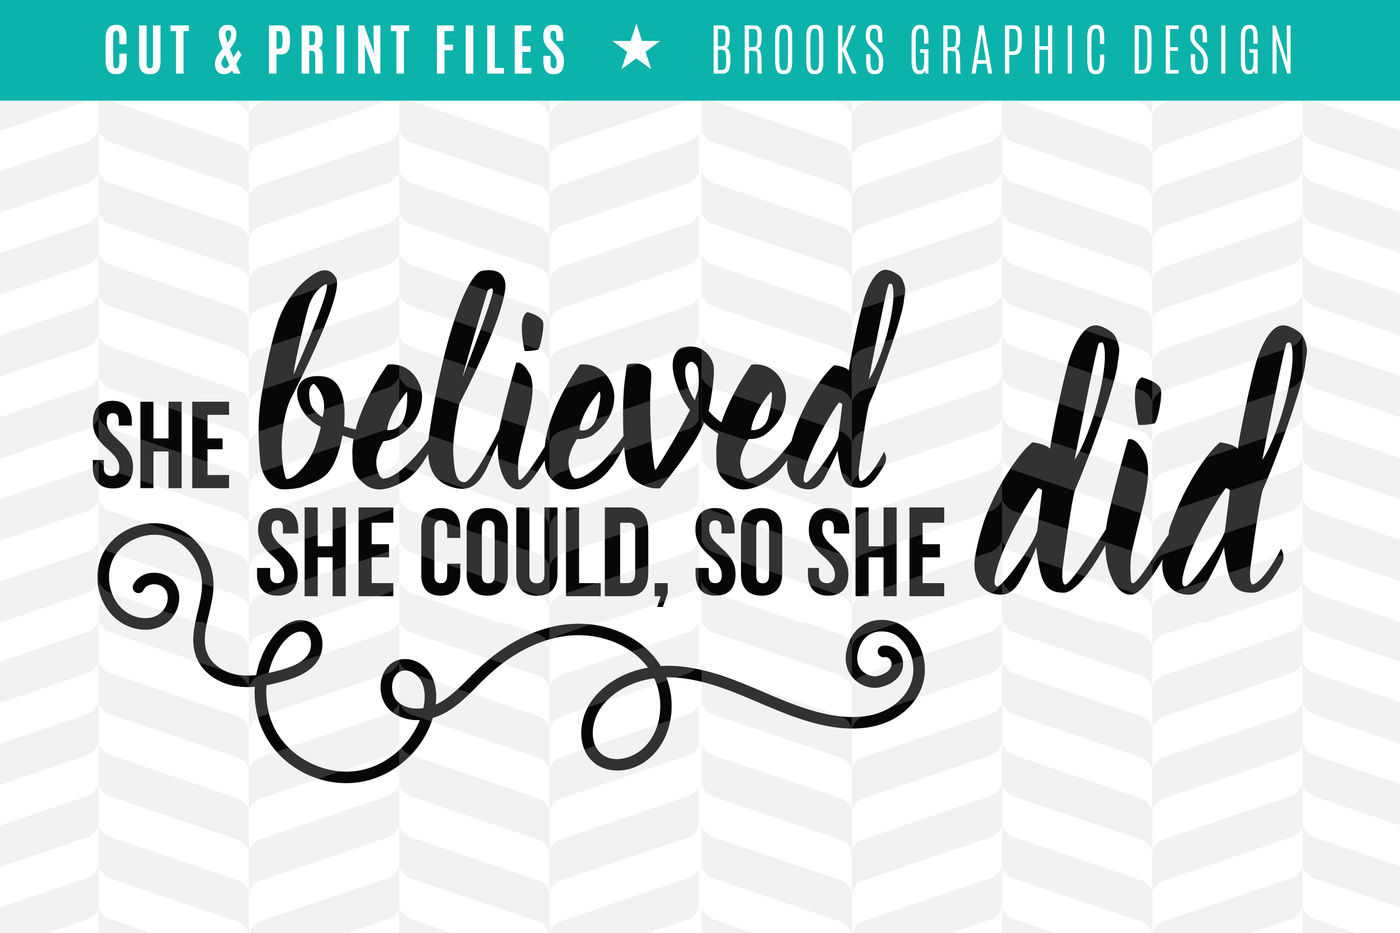 1. "She believed she could, so she did" - wide 7